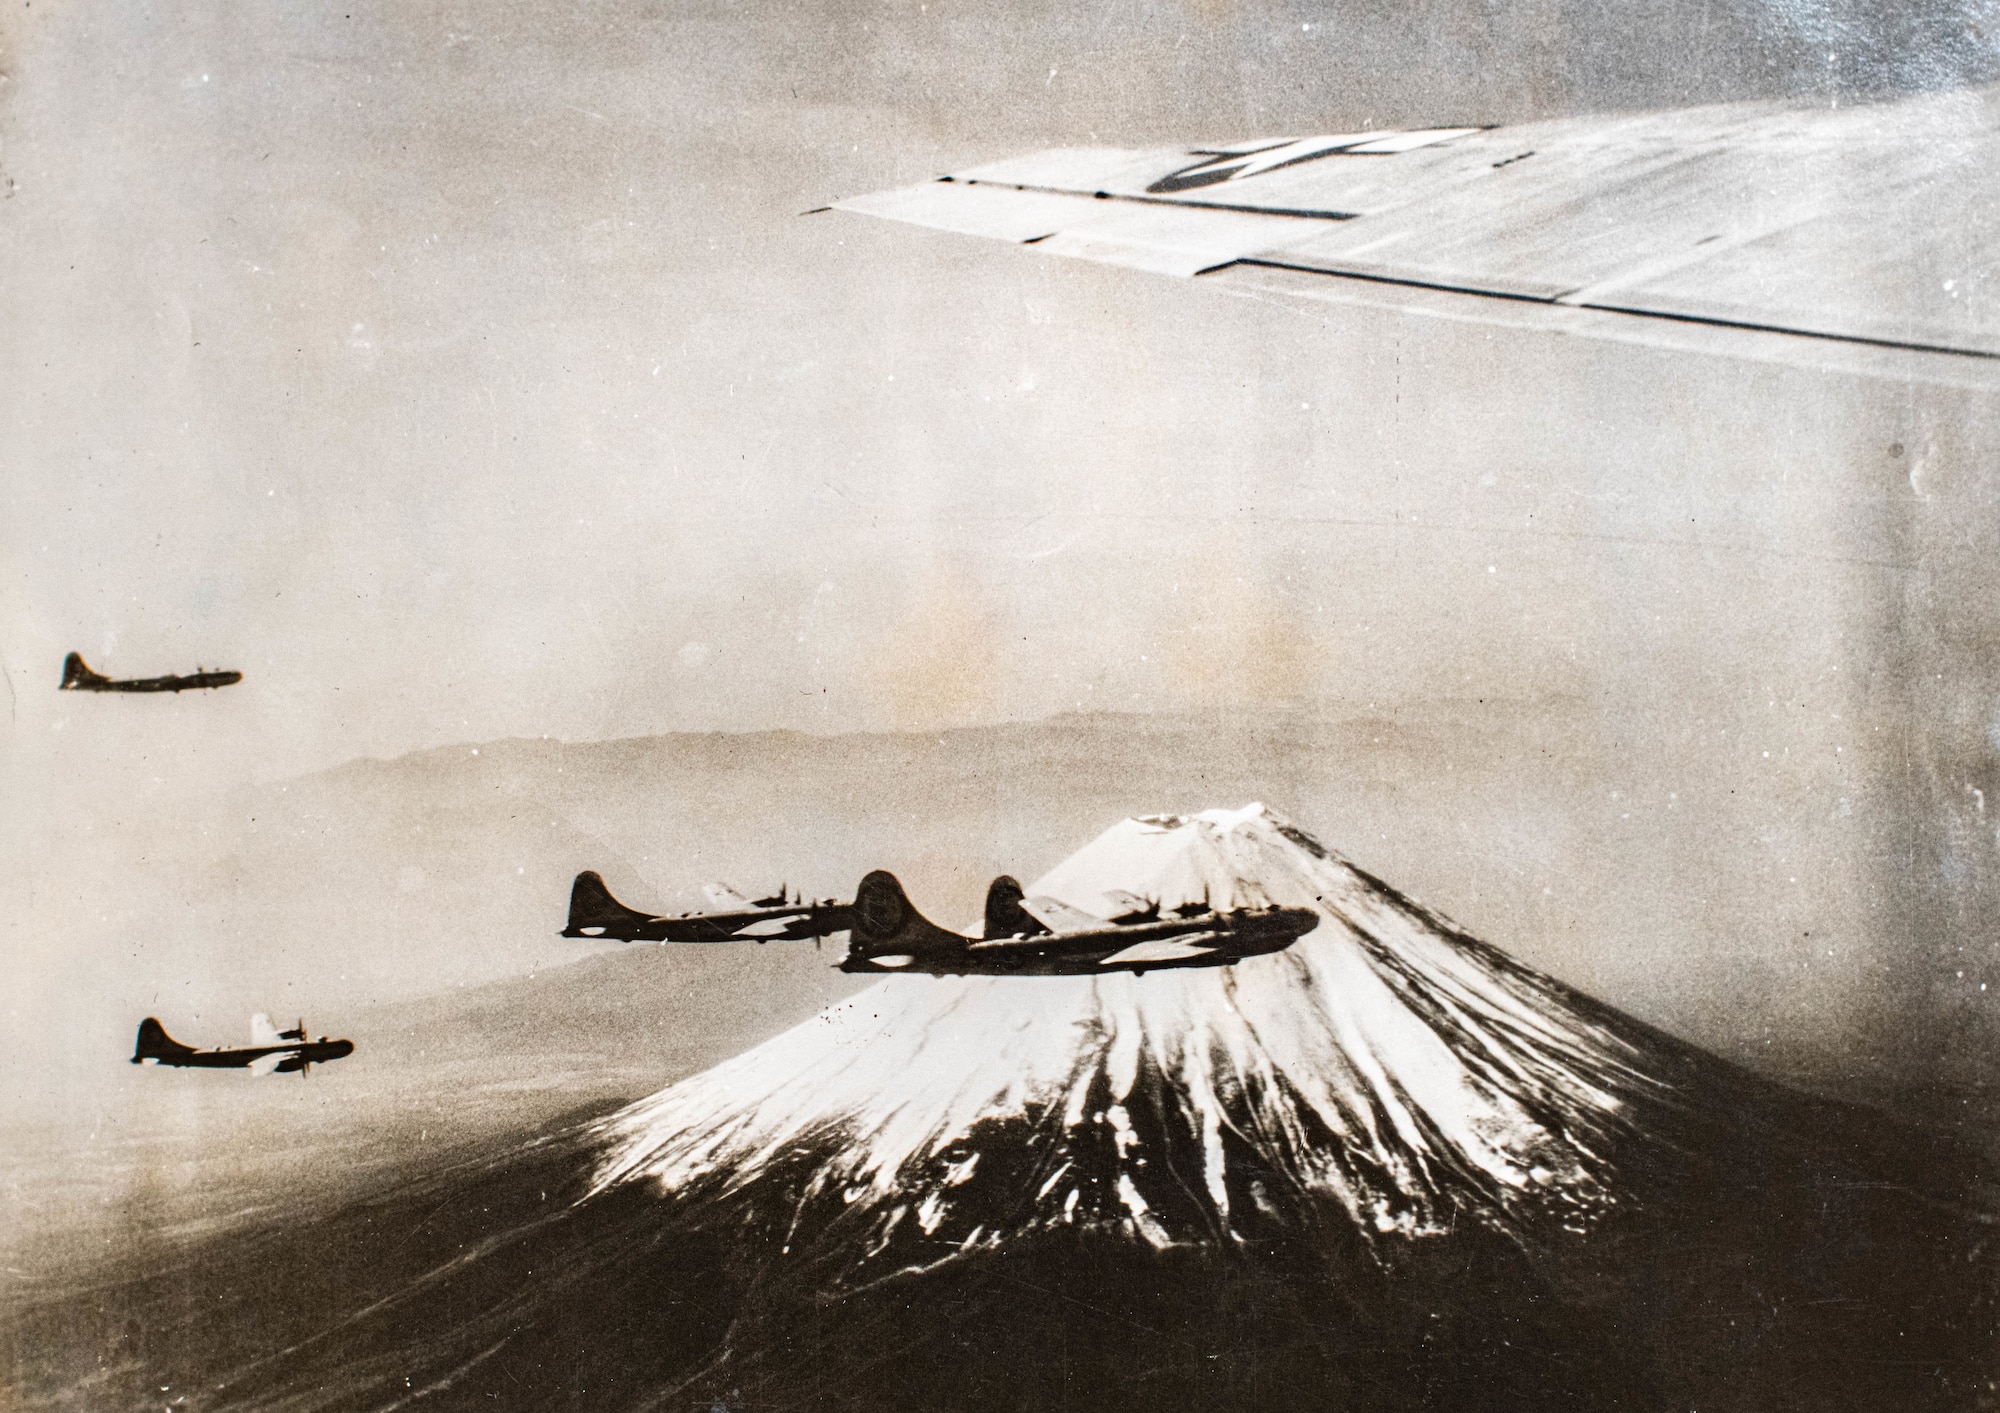 Several B-29 Superfortresses fly near Mount Fuji in Japan during World War II.